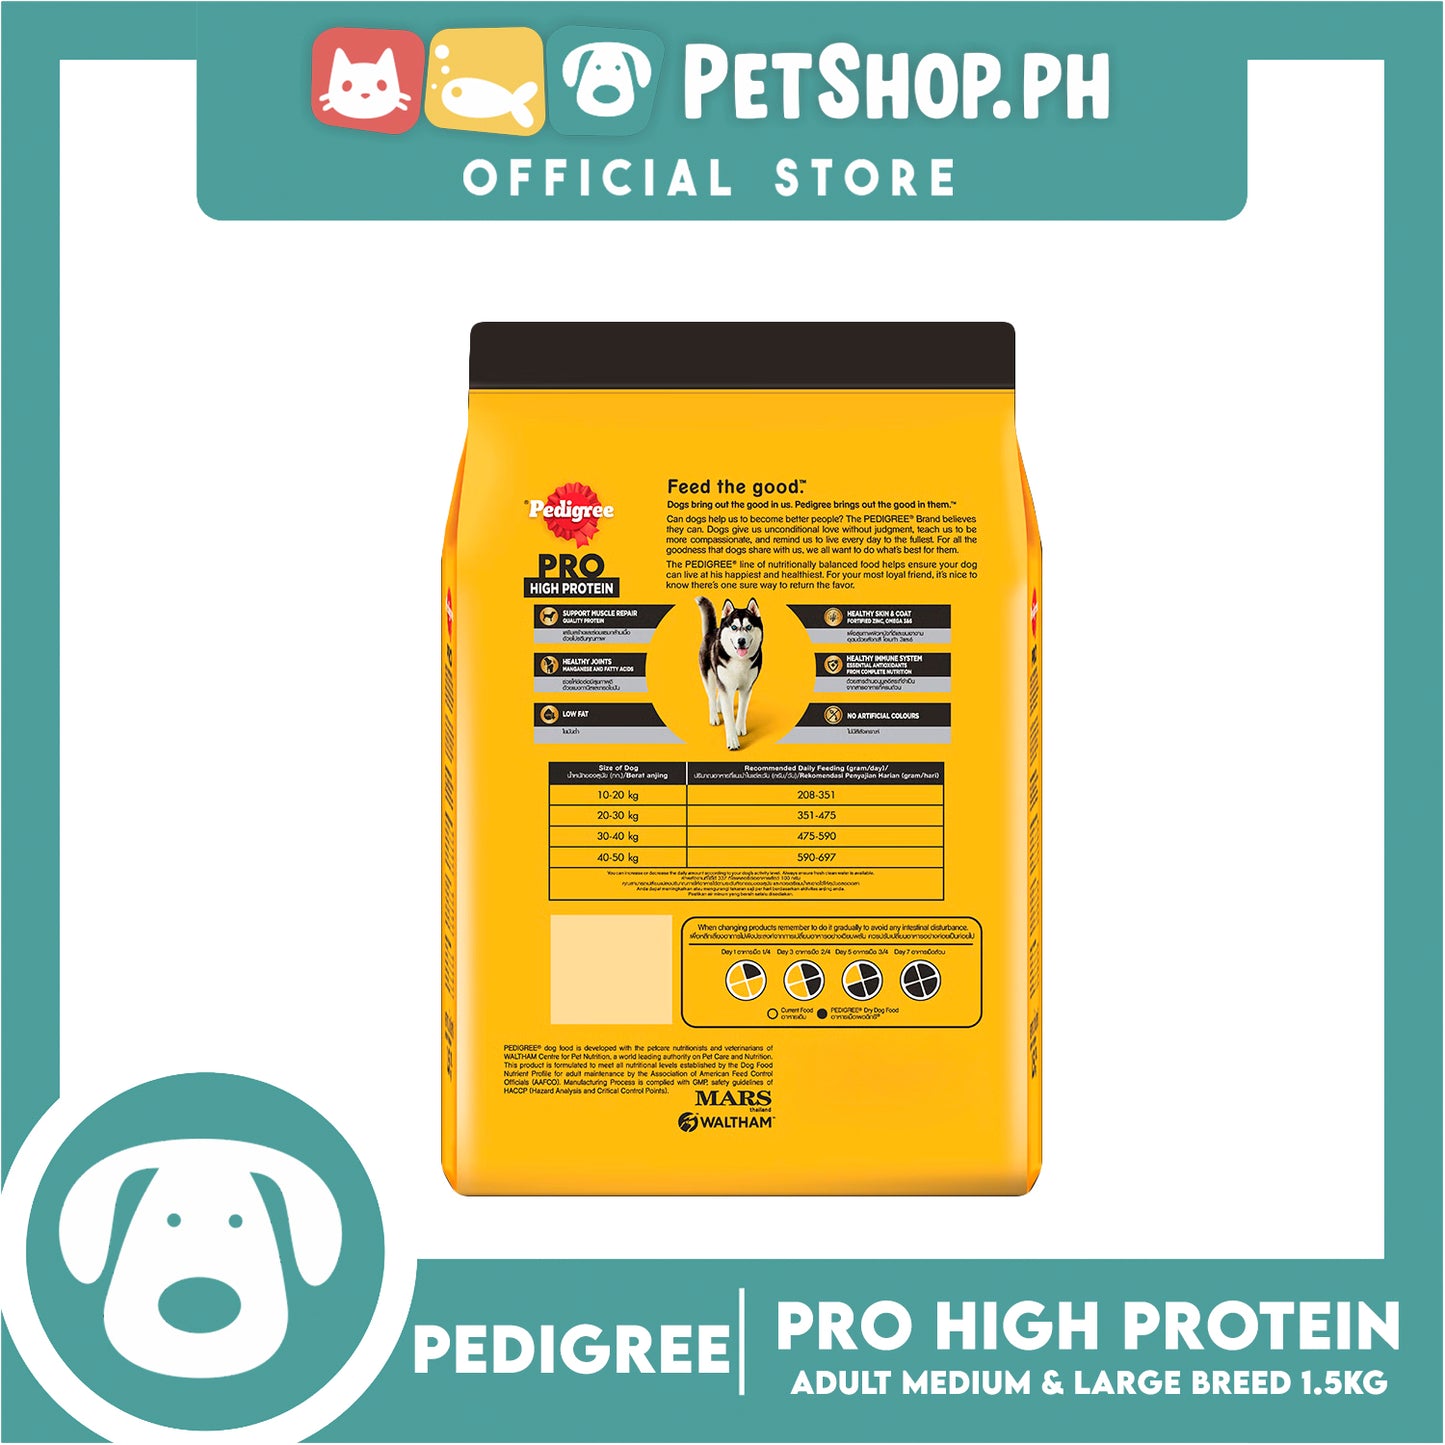 Pedigree Pro Adult Medium and Large Breed 1.5kg Dry Food for Adult Dogs